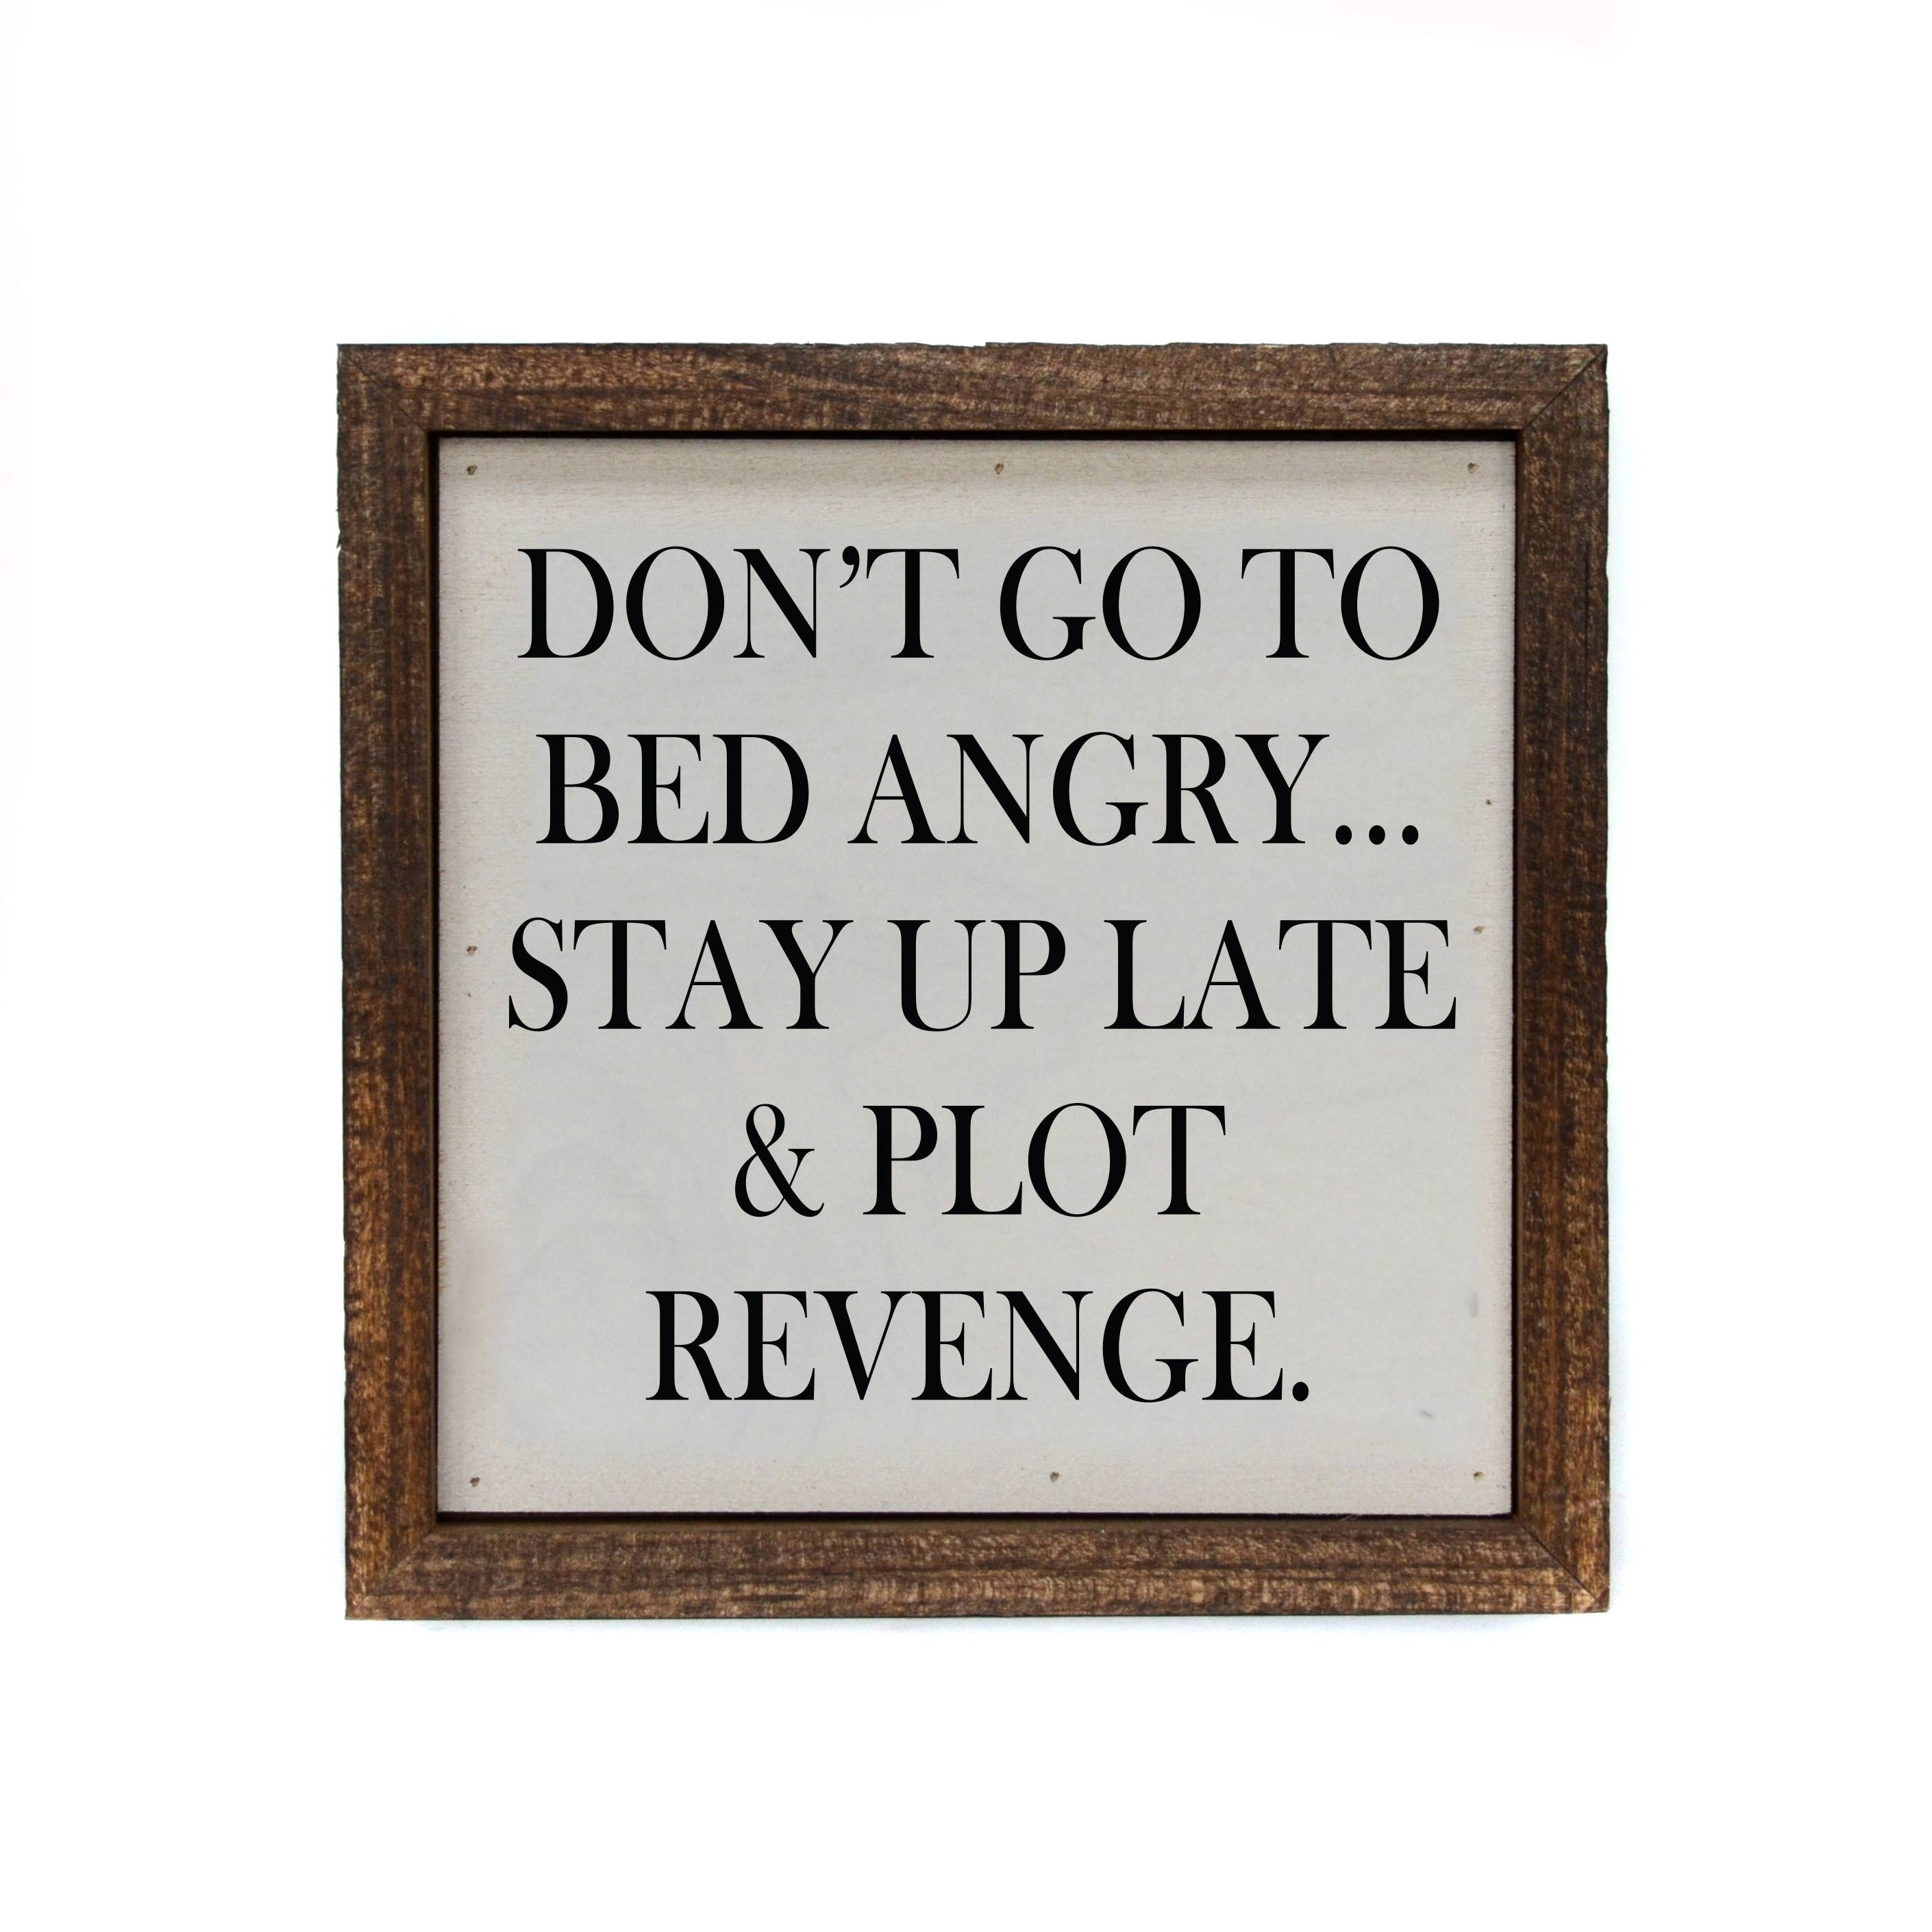 Don't Go To Bed Angry... Stay Up Late & Plot Revenge - Sign